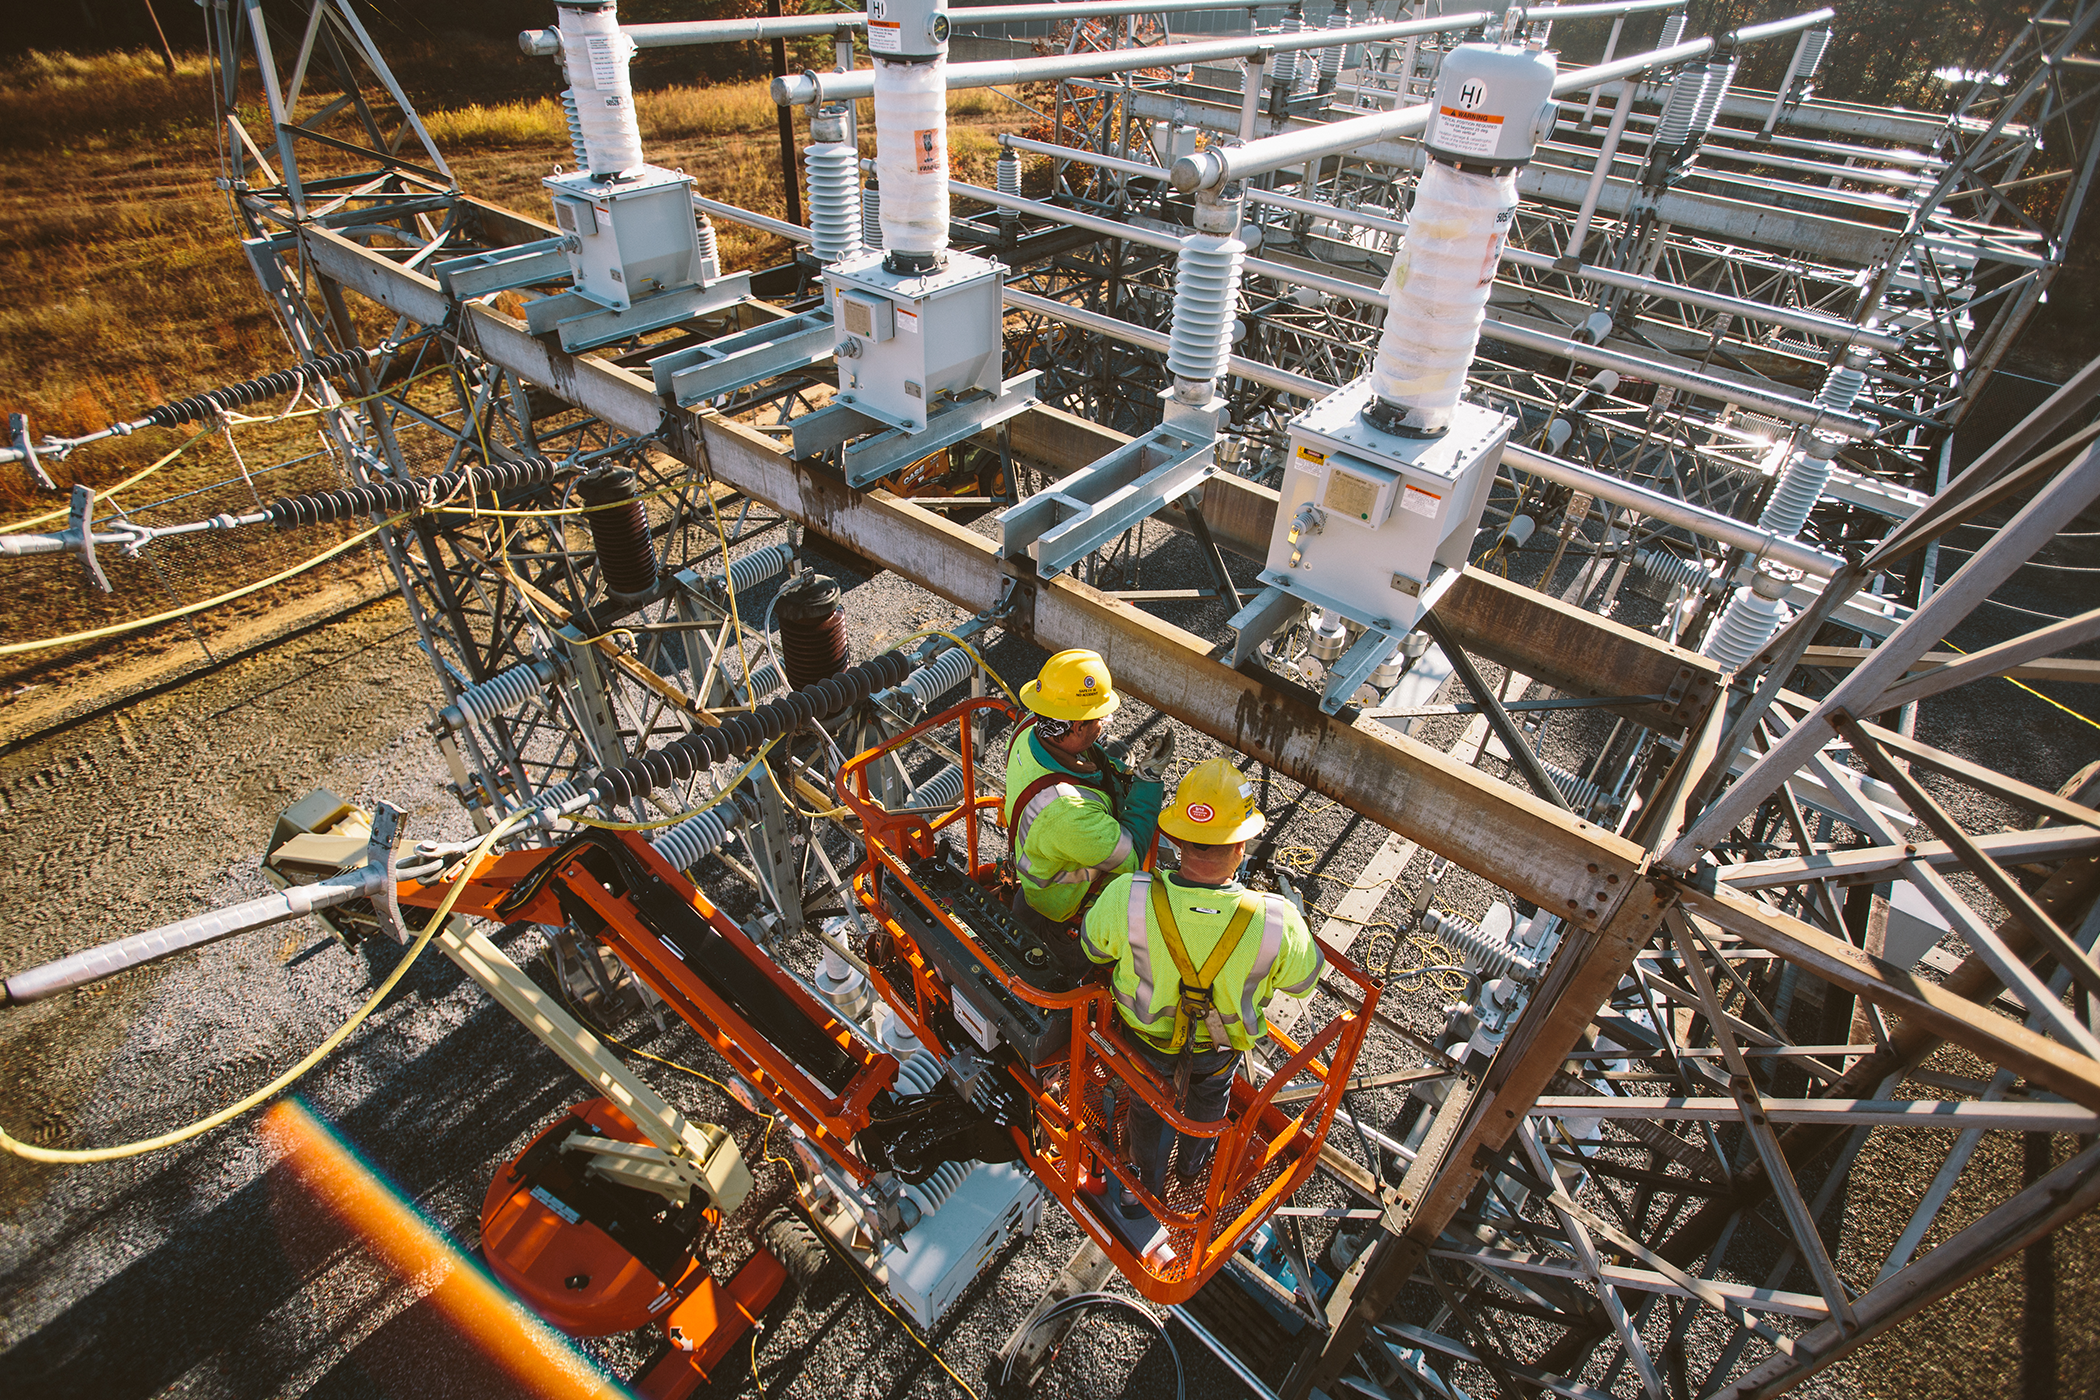 Two NRE employees in a lift working at a substation.